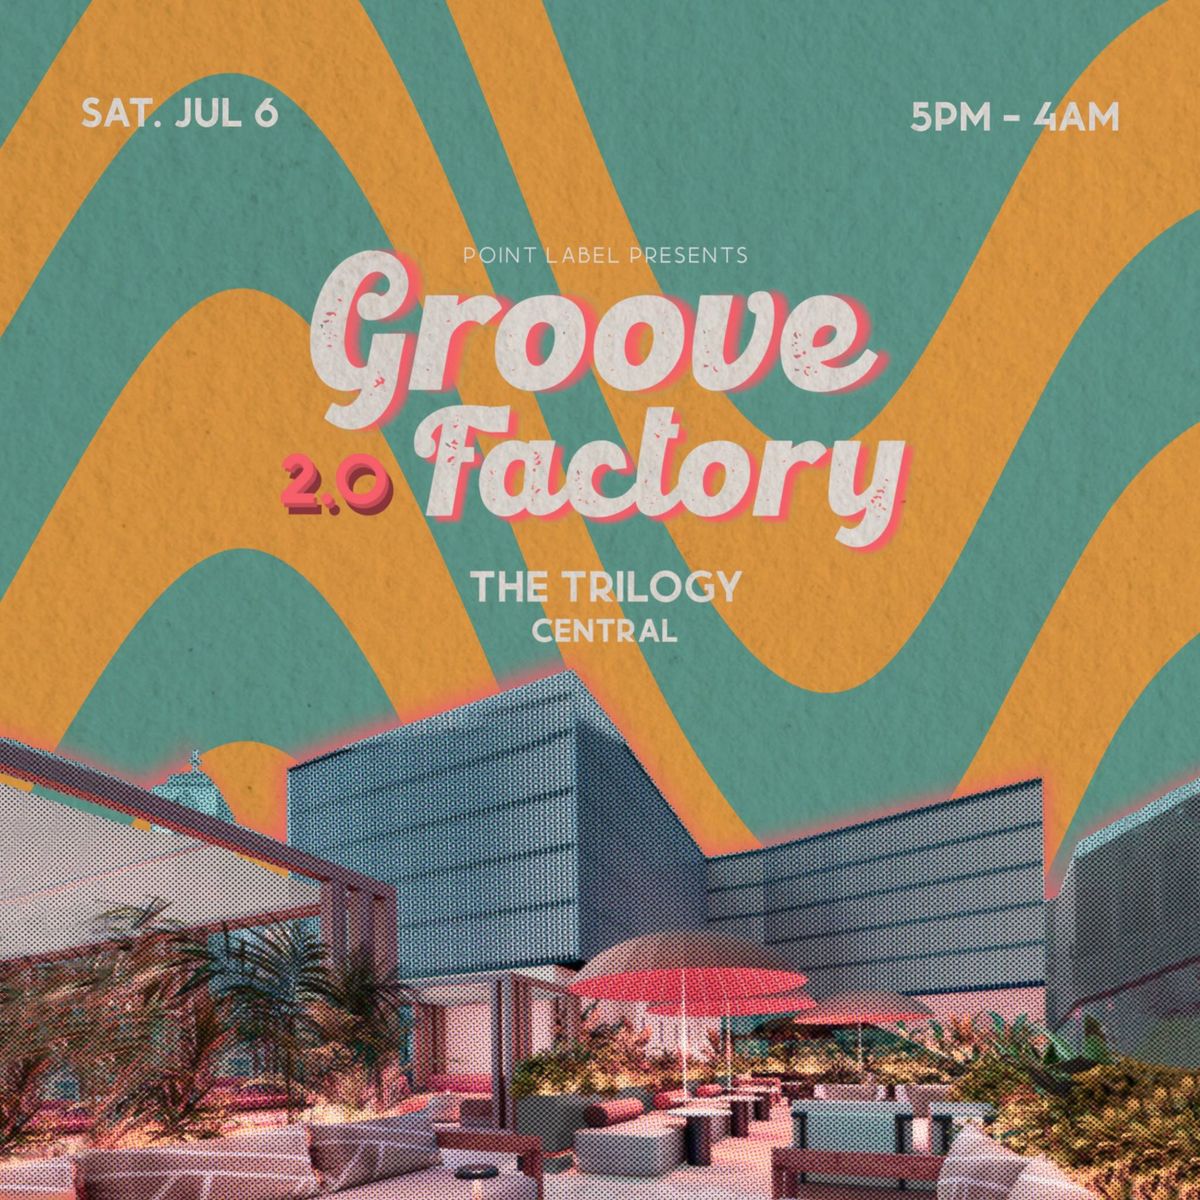 Groove Factory 2.0